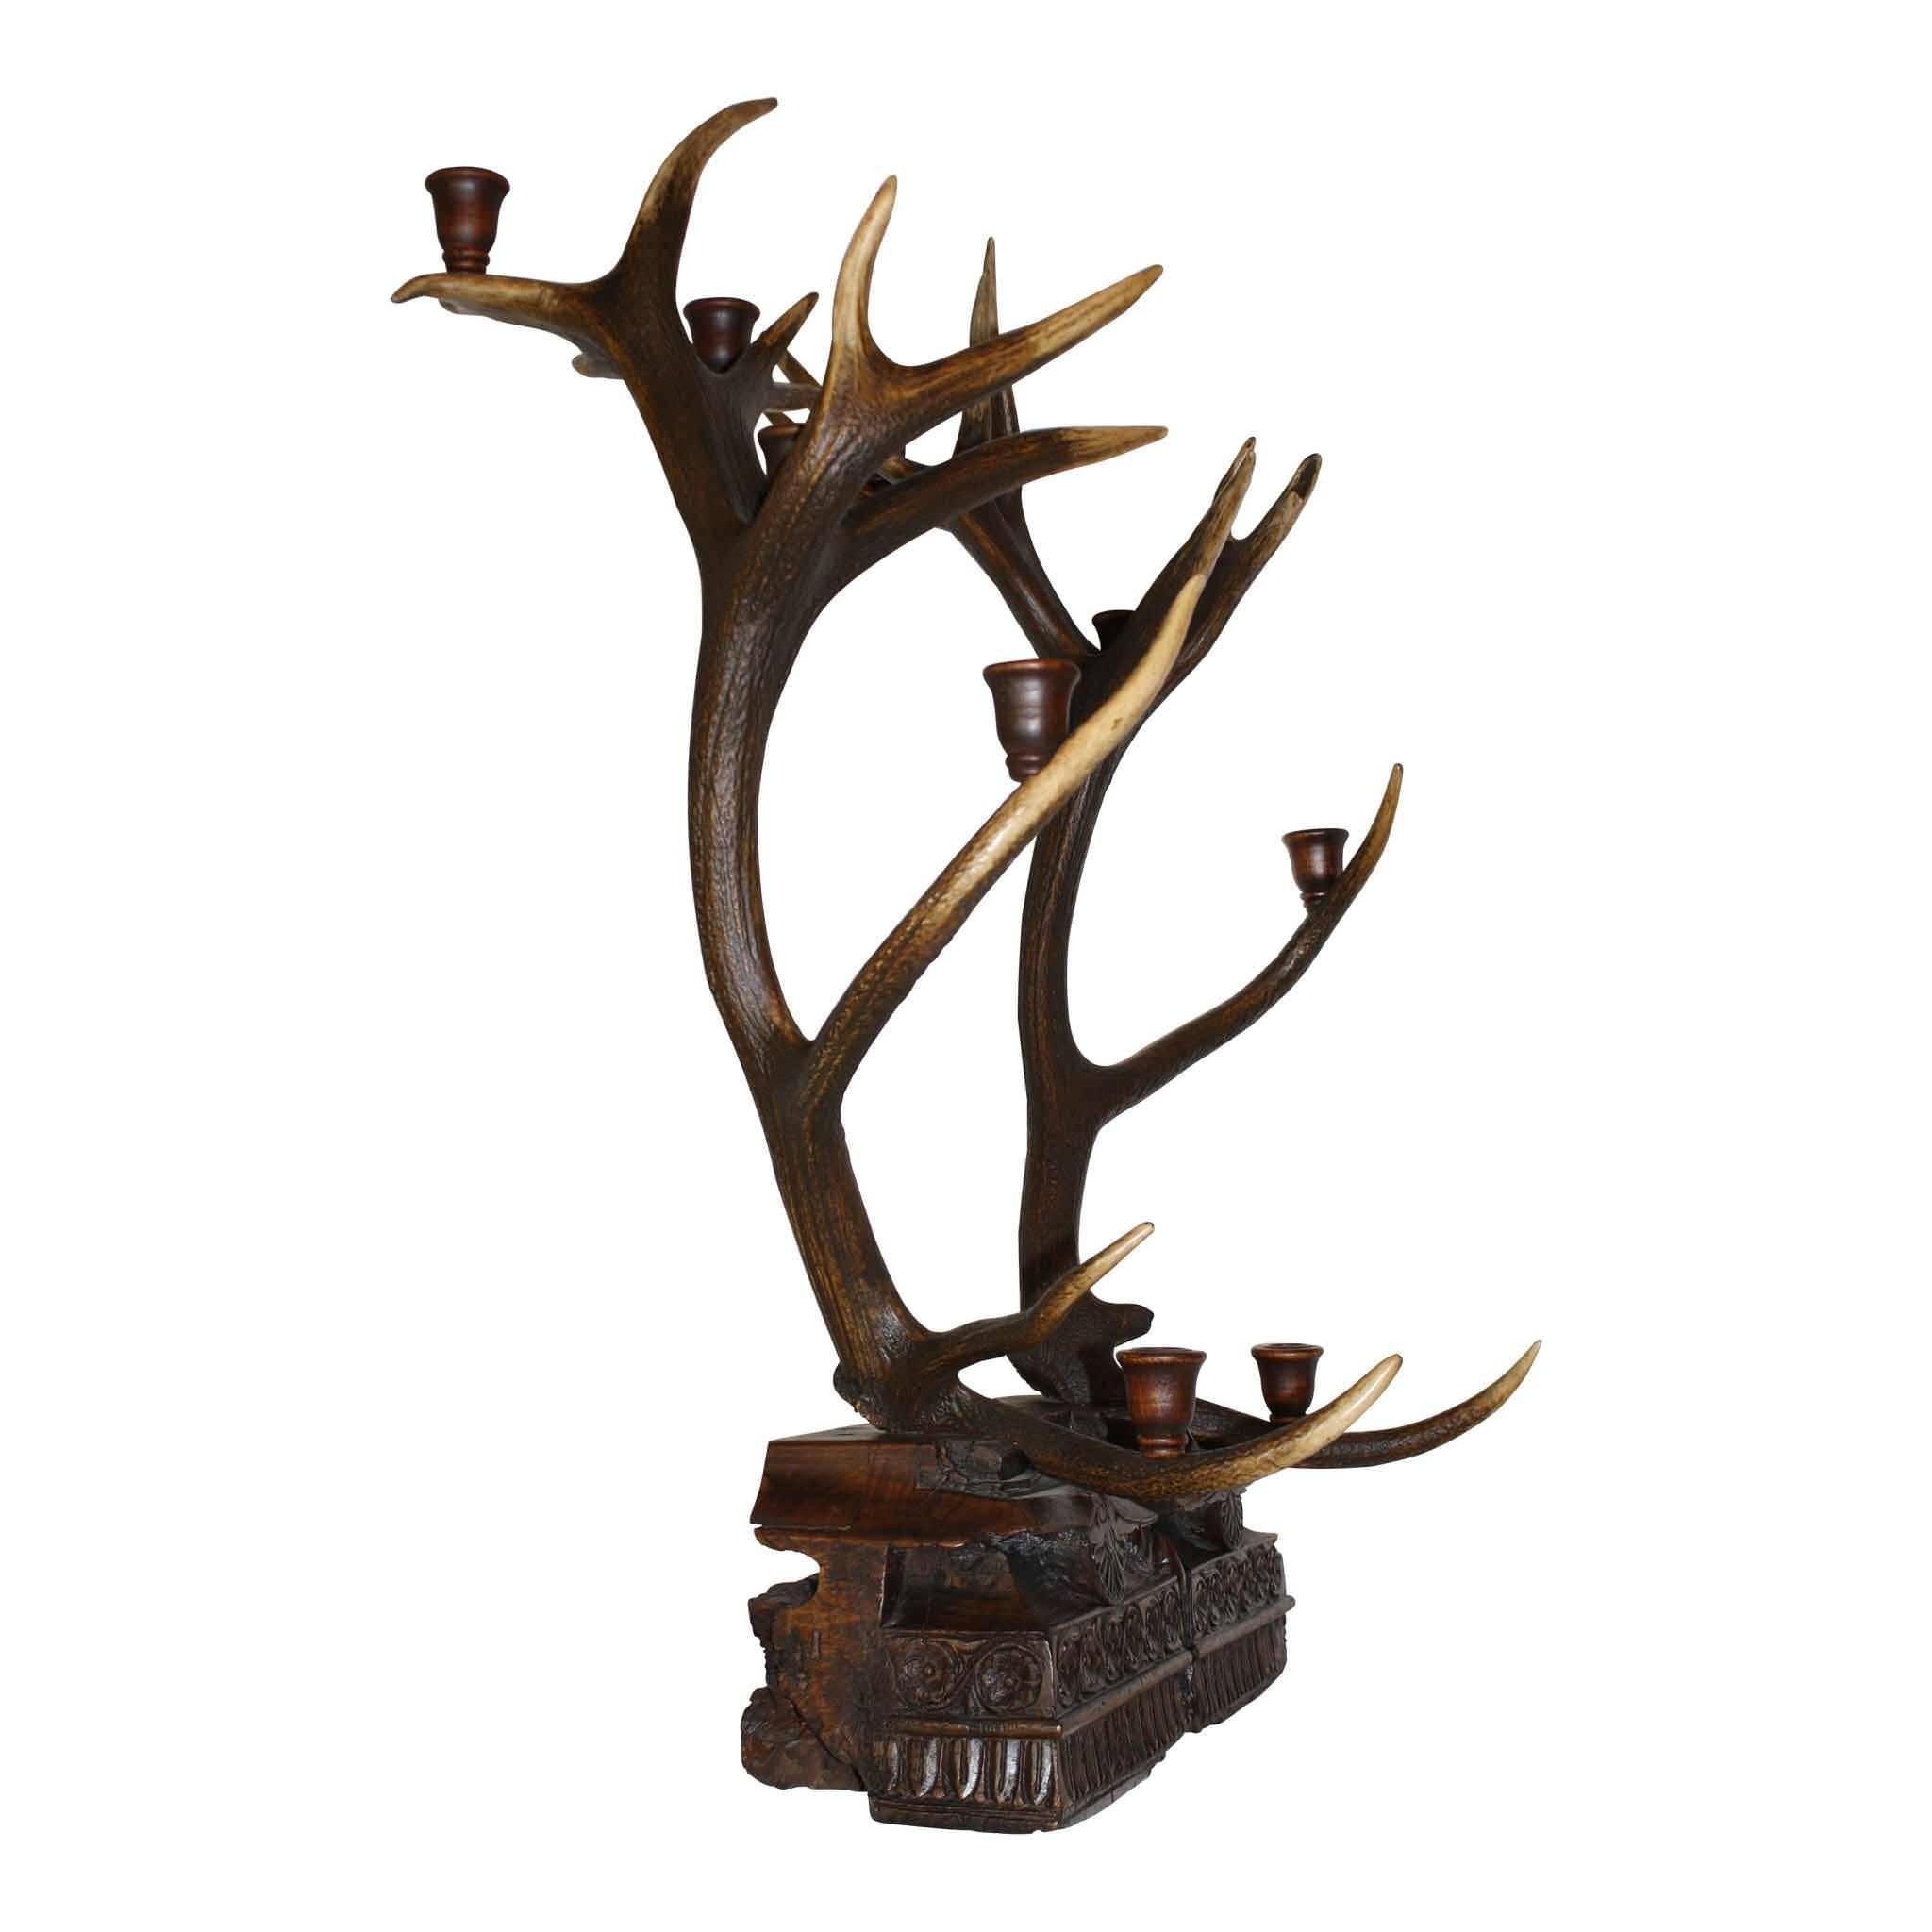 Containing 16 or more antler points, this monarch stag candelabra is dark brown with white tips. The burrs are mounted on an ornately carved piece of wood with a repetitive floral and leaf pattern interrupted by a decorative pendant. While the